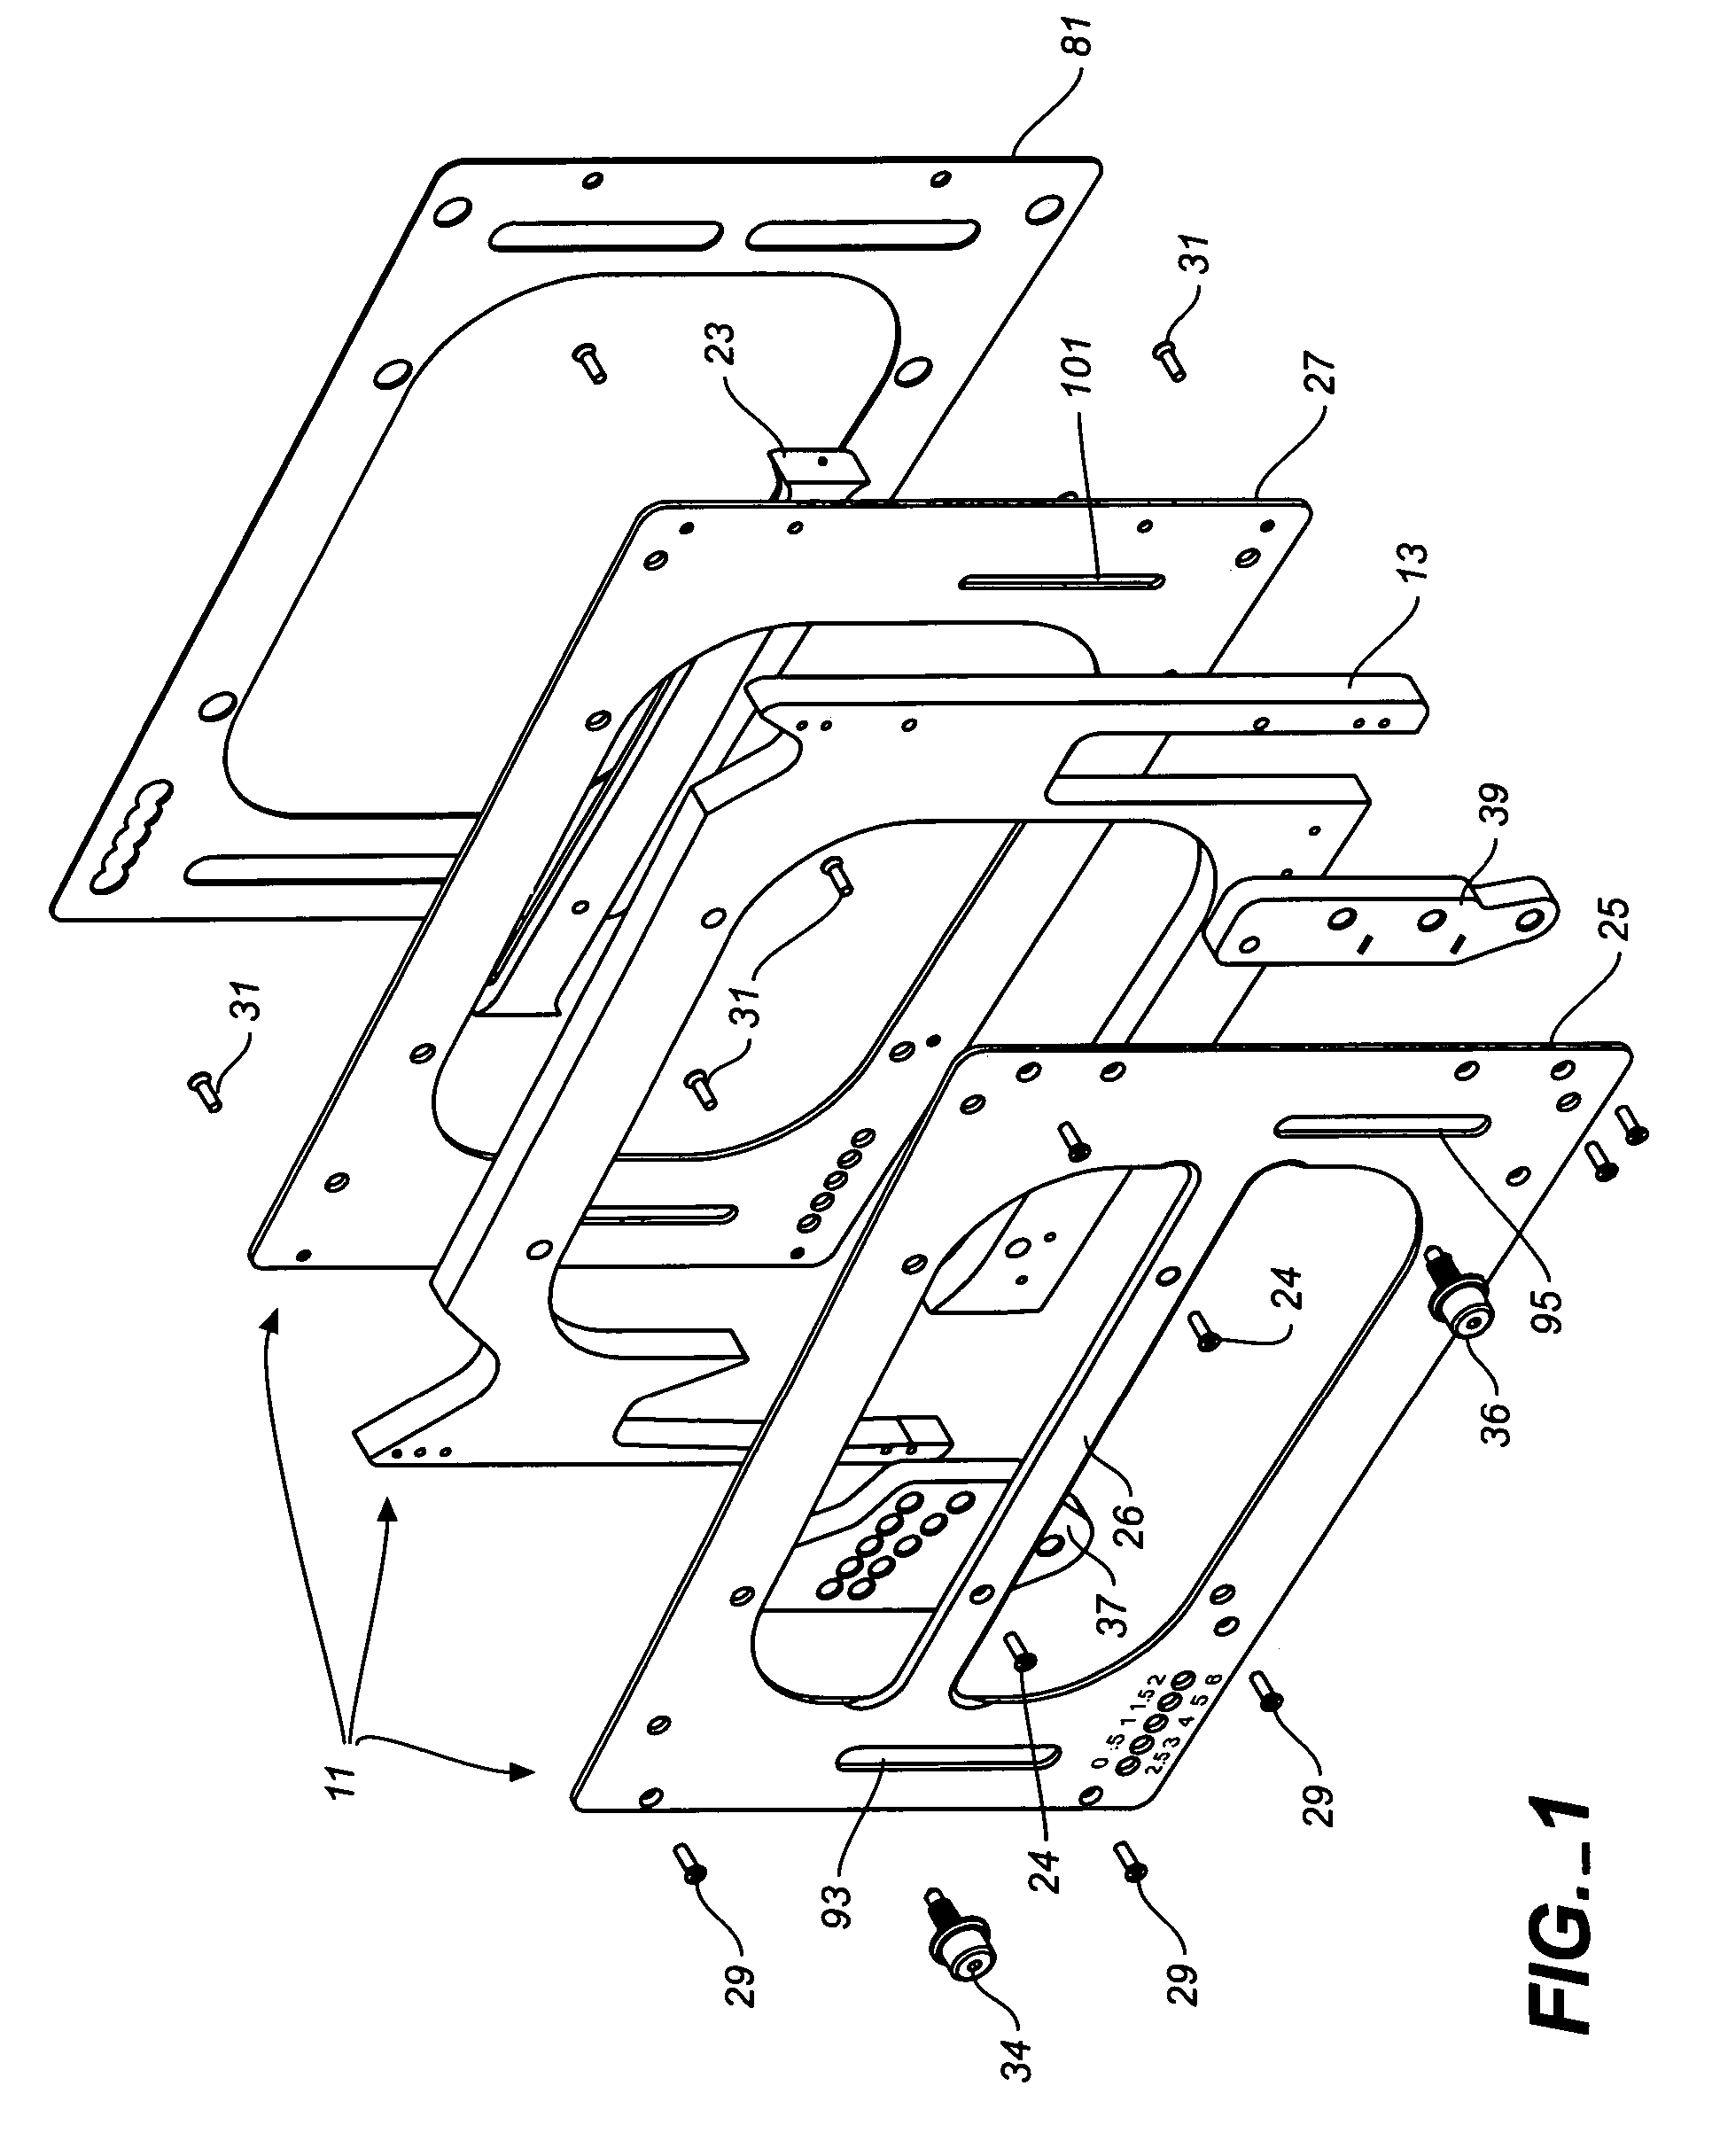 Loudspeaker rigging system having contained maneuverable connecting links